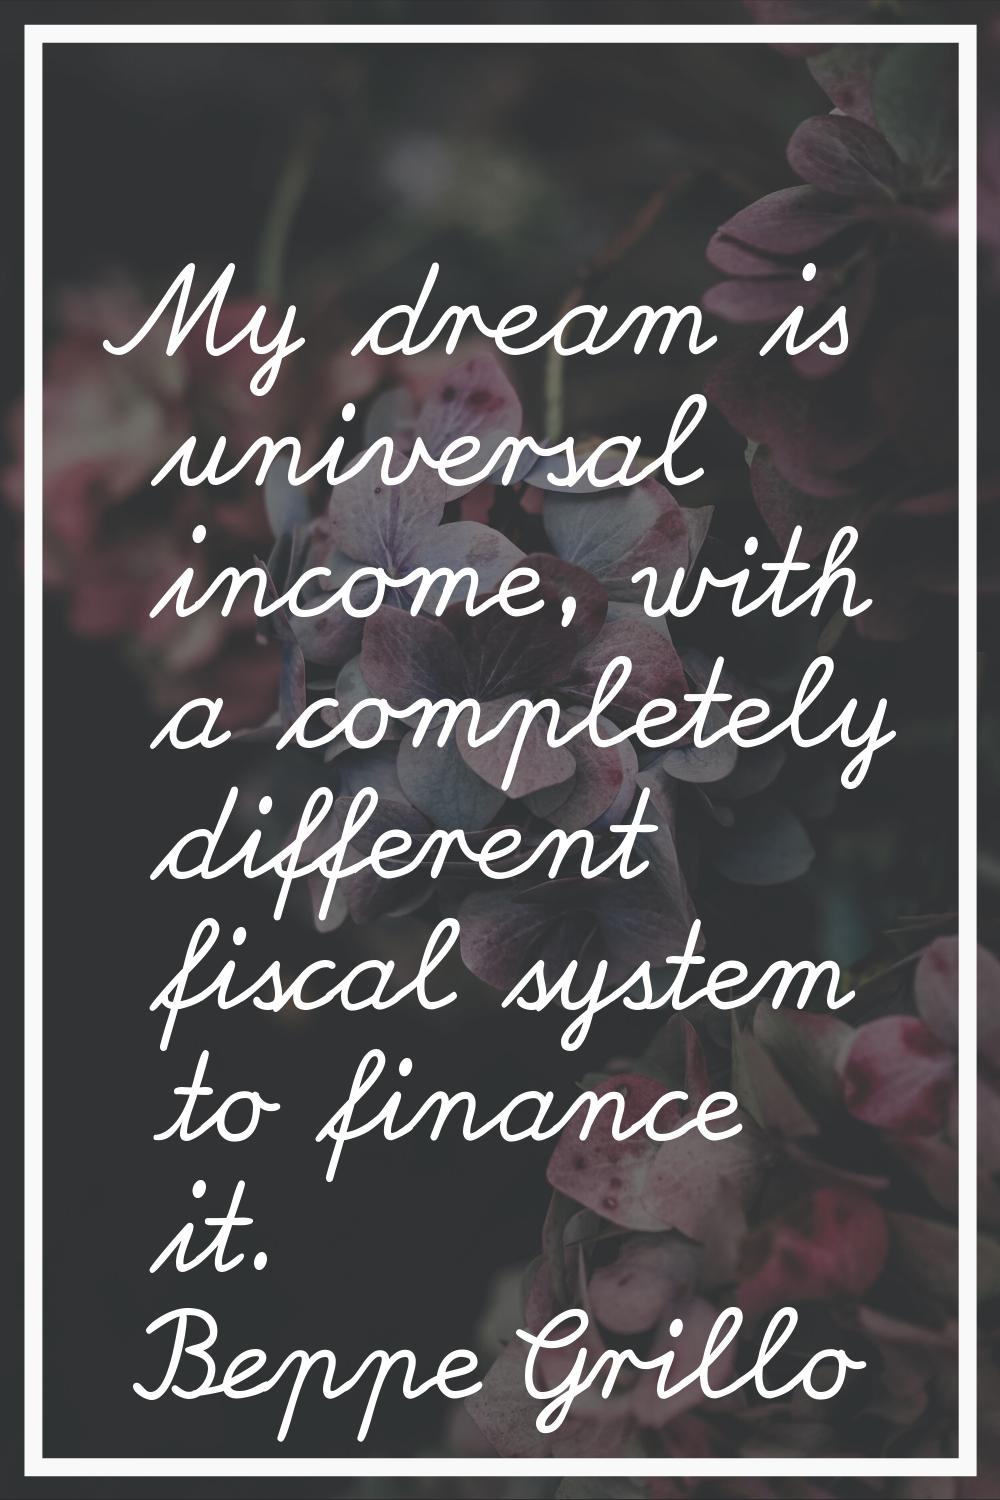 My dream is universal income, with a completely different fiscal system to finance it.